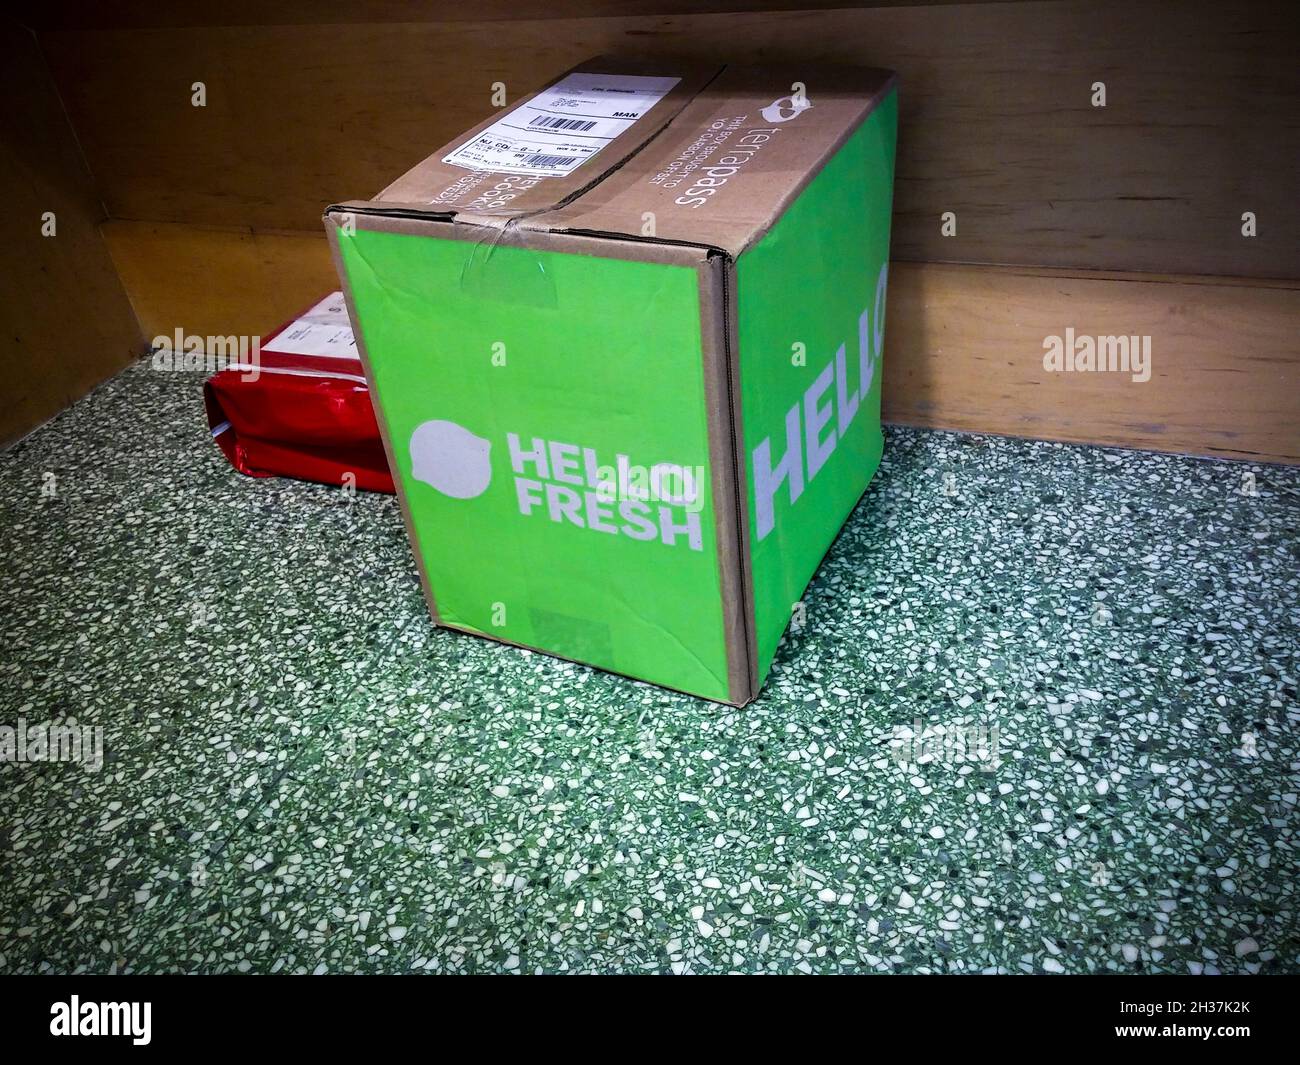 A delivery from the Hello Fresh meal subscription service waits to be picked up in the lobby of an apartment building in New York on Tuesday, October 5, 2021. (© Richard B. Levine) Stock Photo